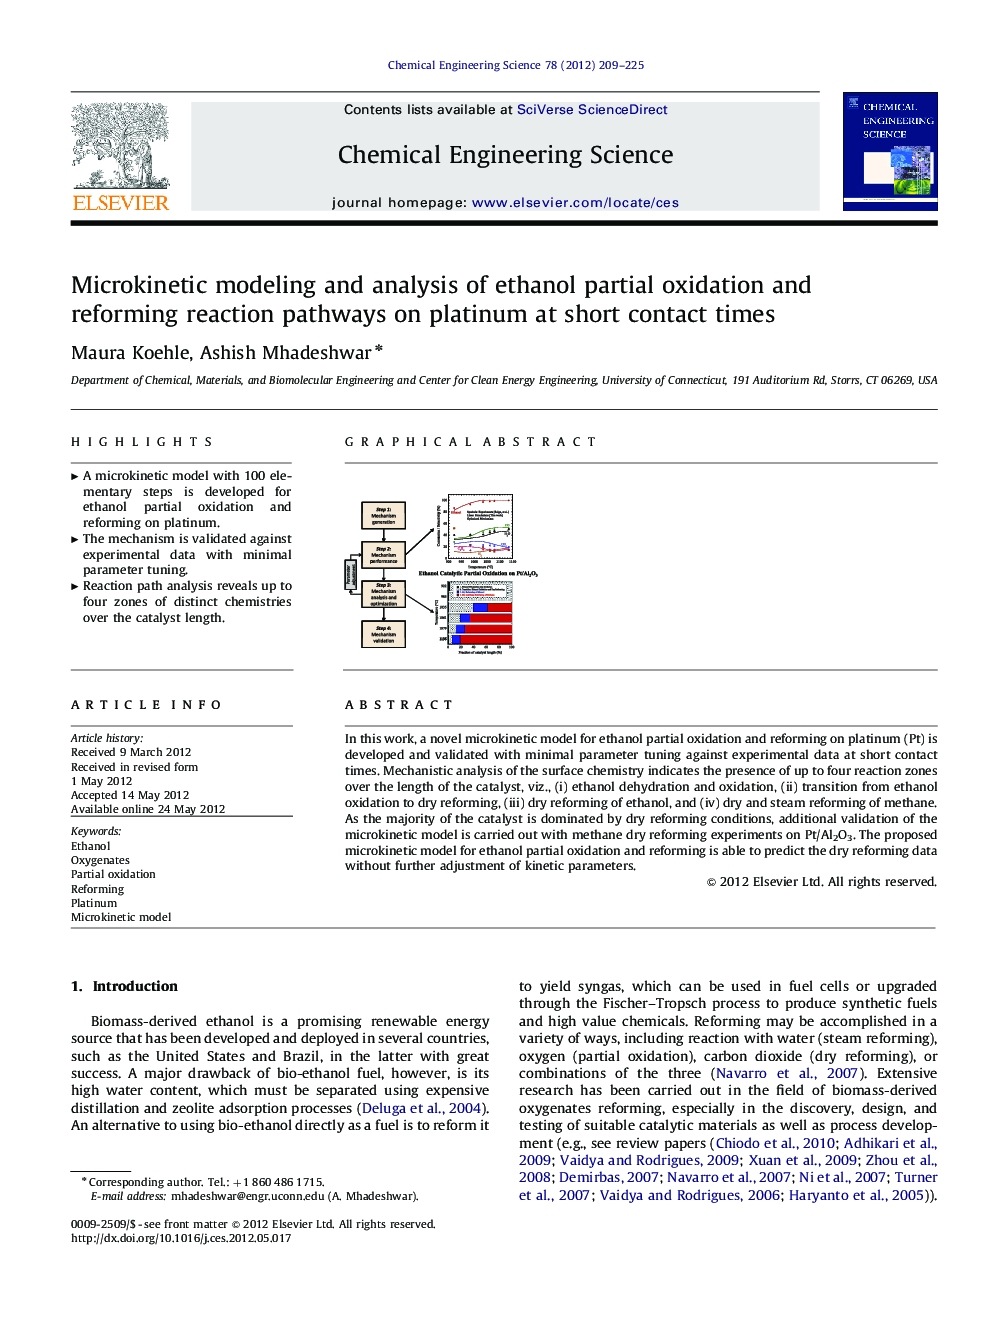 Microkinetic modeling and analysis of ethanol partial oxidation and reforming reaction pathways on platinum at short contact times